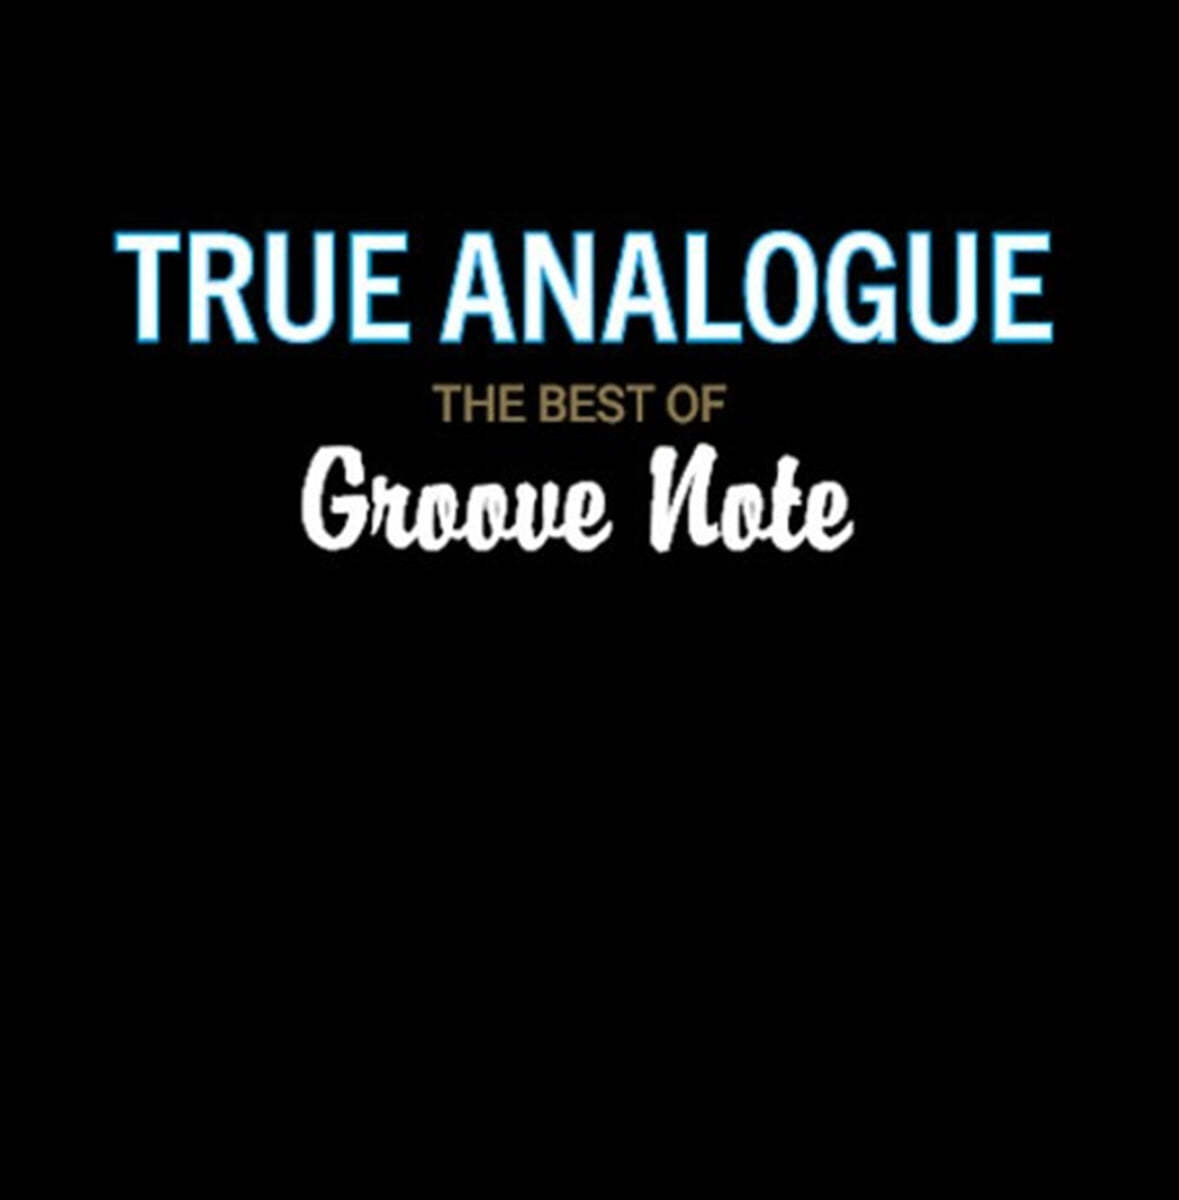 Groove Note 레이블 베스트 모음집 (True Analogue: The Best of Groove Note Records) [2LP]